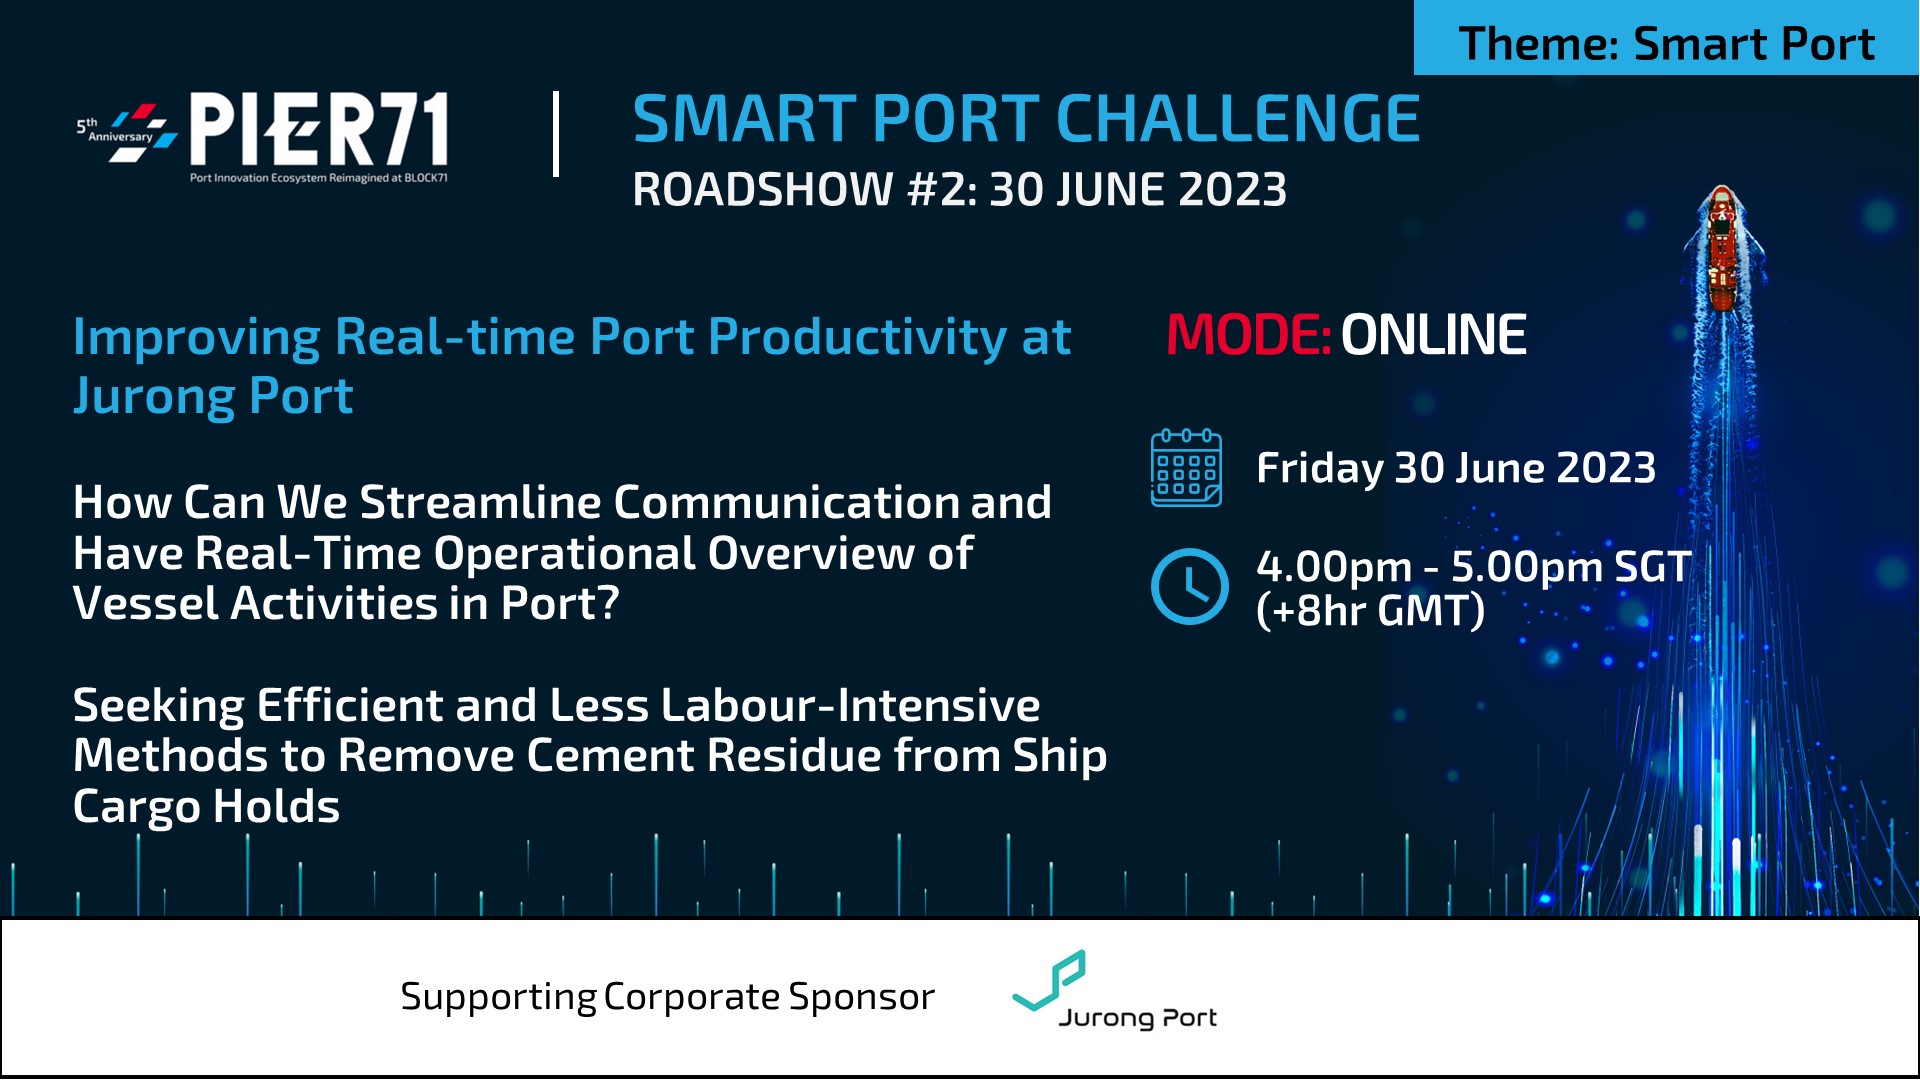 SPC2023 Roadshow: Improving Real-time Port Productivity at Jurong Port (Mode: Online)